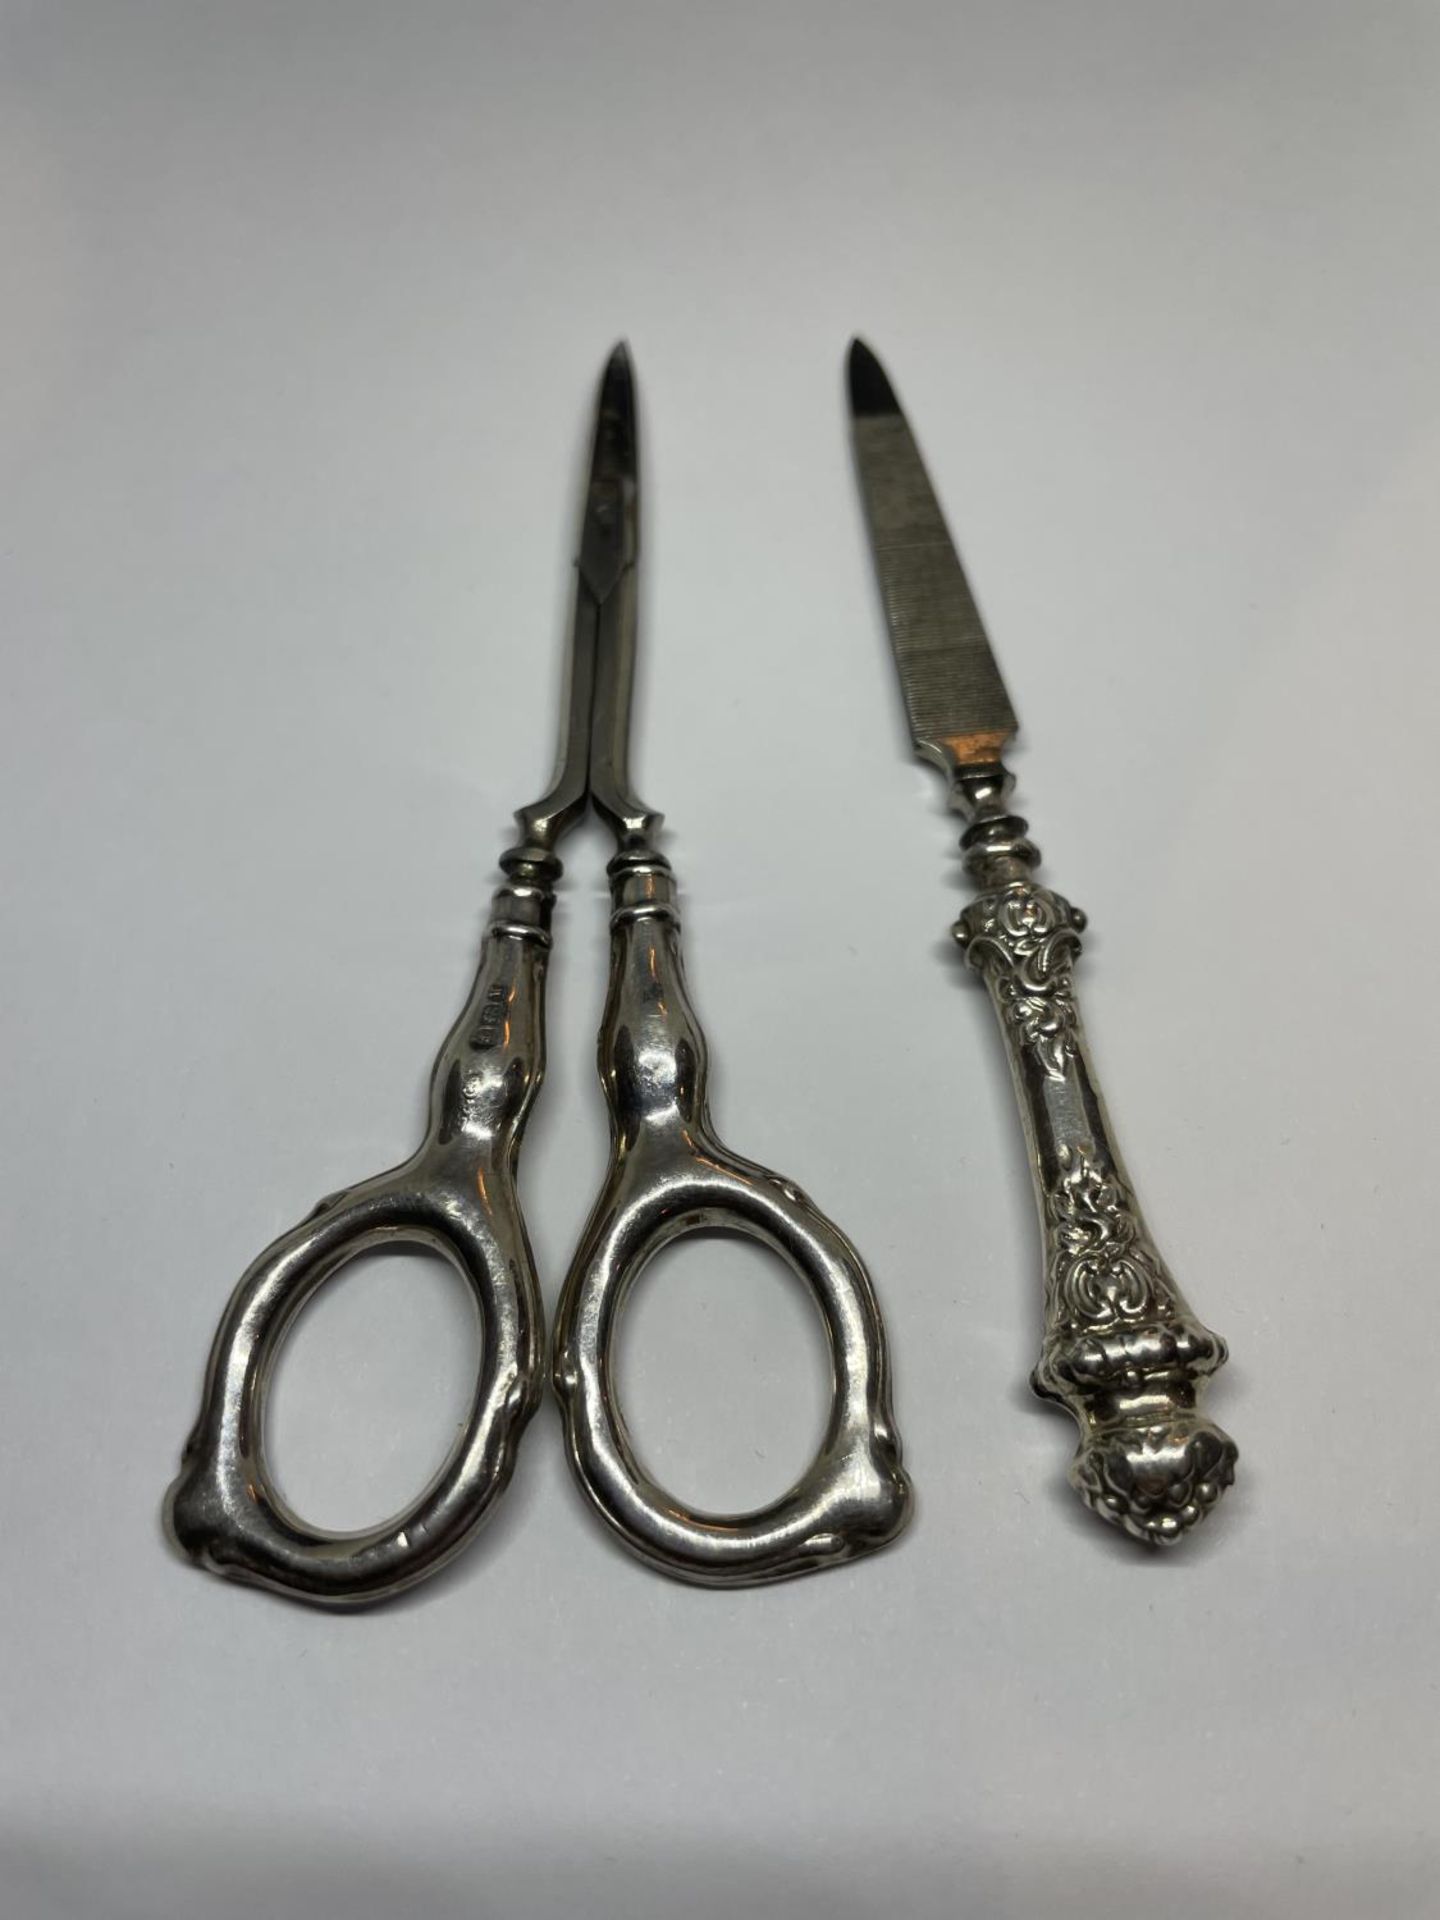 TWO SILVER HANDLED ITEMS TO INCLUDE A PAIR OF SISSORS AND A NAIL FILE